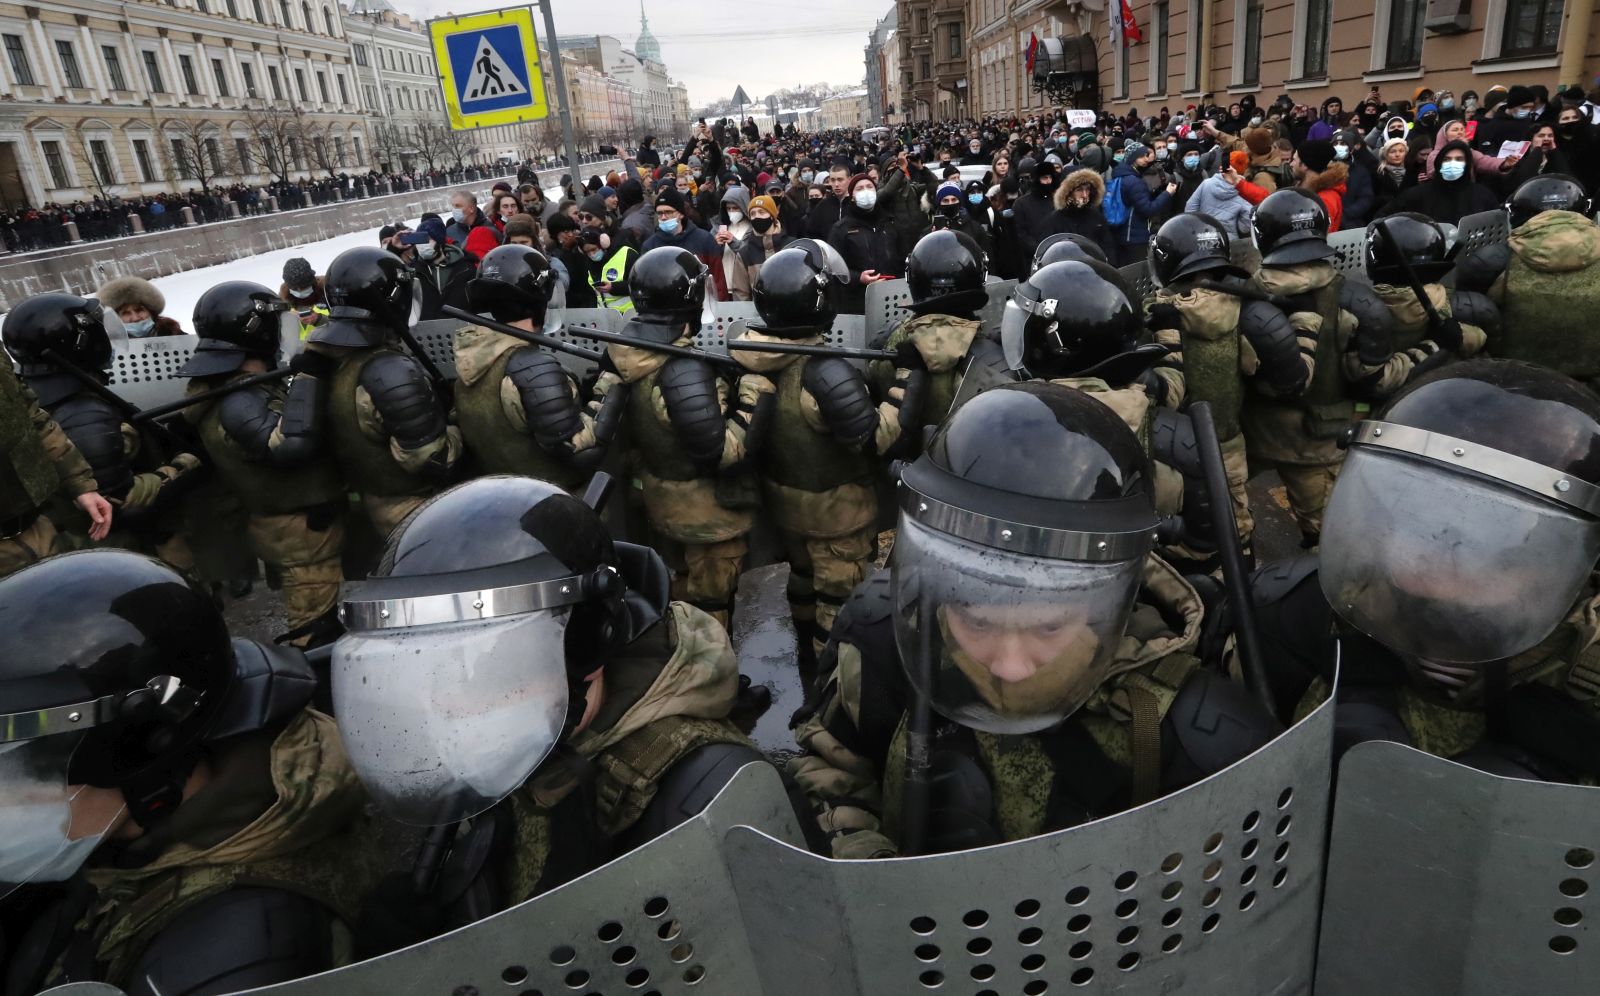 epaselect epa08977176 Russian police officers during an unauthorized protest in support of Russian opposition leader Alexei Navalny, in St. Petersburg, Russia, 31 January 2021. Navalny was detained after his arrival to Moscow from Germany, where he was recovering from a poisoning attack with a nerve agent, on 17 January 2021. A Moscow judge on 18 January ruled that he will remain in custody for 30 days following his airport arrest. Navalny urged Russians to take to the streets to protest. In many Russian cities mass events are prohibited due to an increase in COVID-19 cases.  EPA/ANATOLY MALTSEV